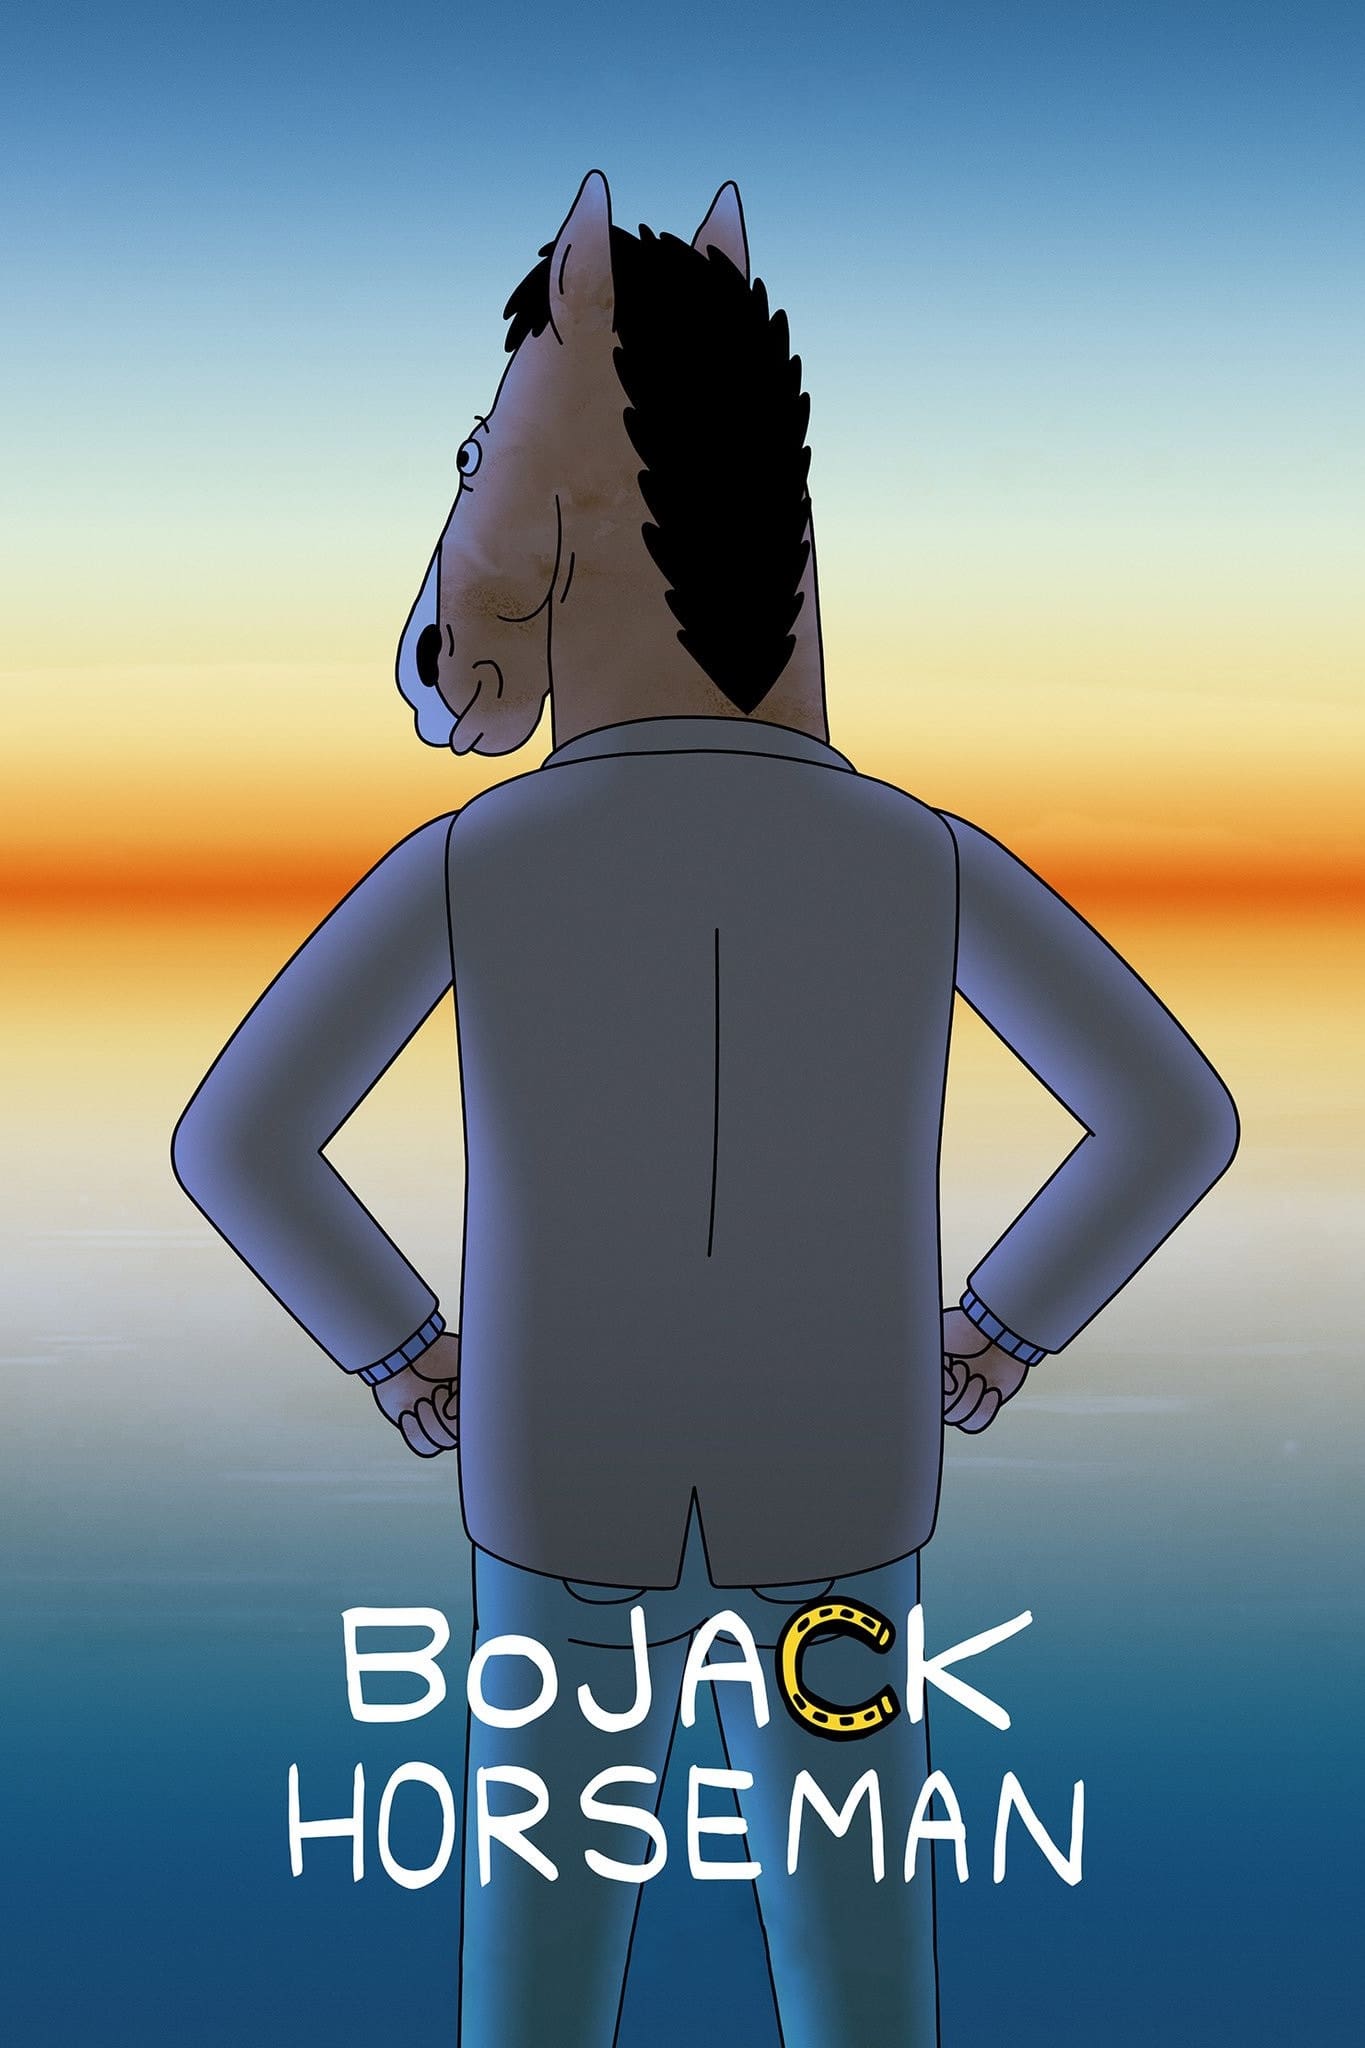 BoJack Horseman TV Shows About Washed Up Star